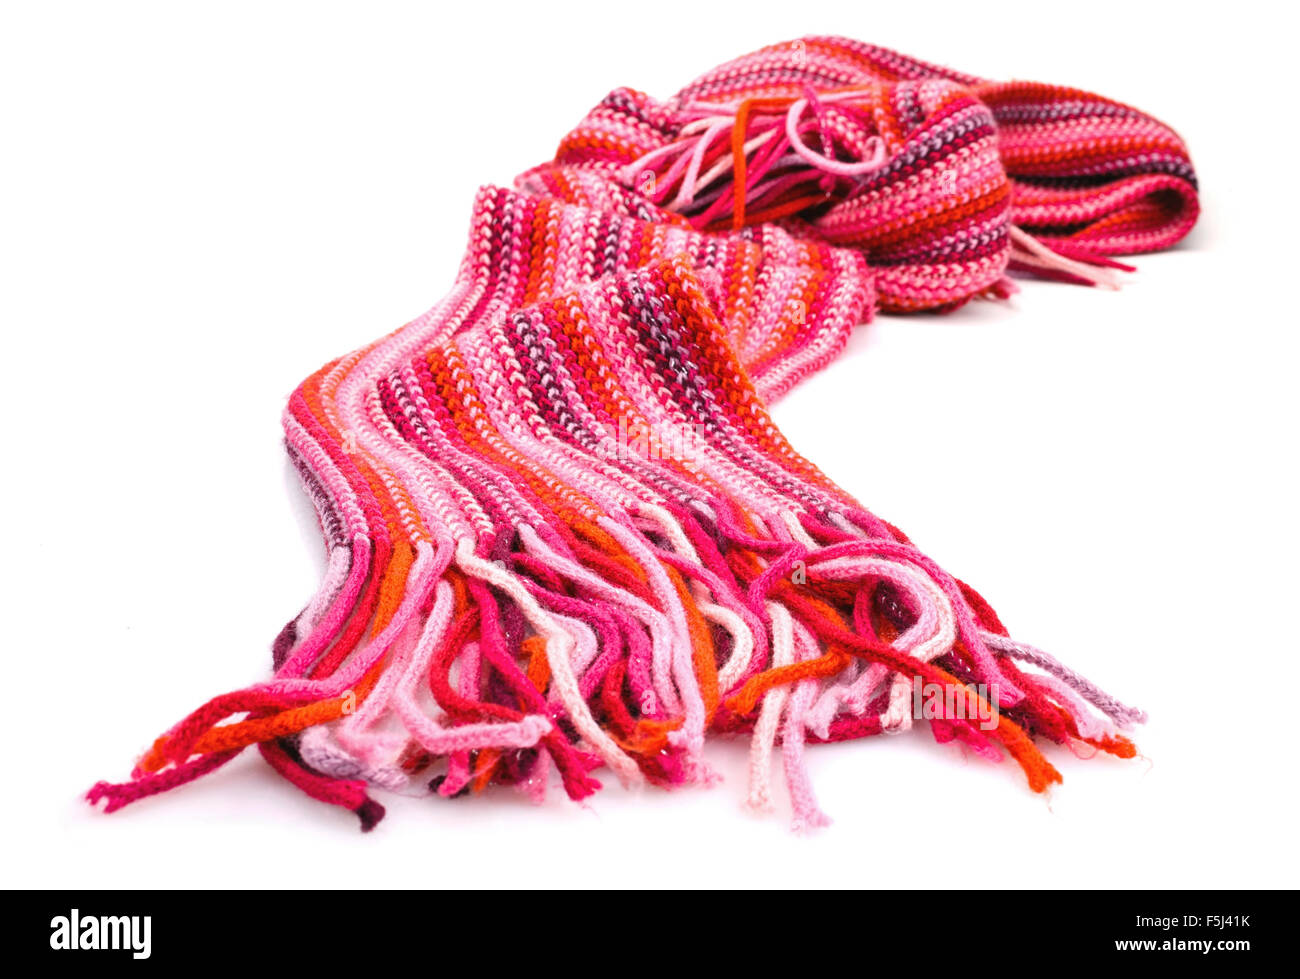 Striped red scarf Stock Photo